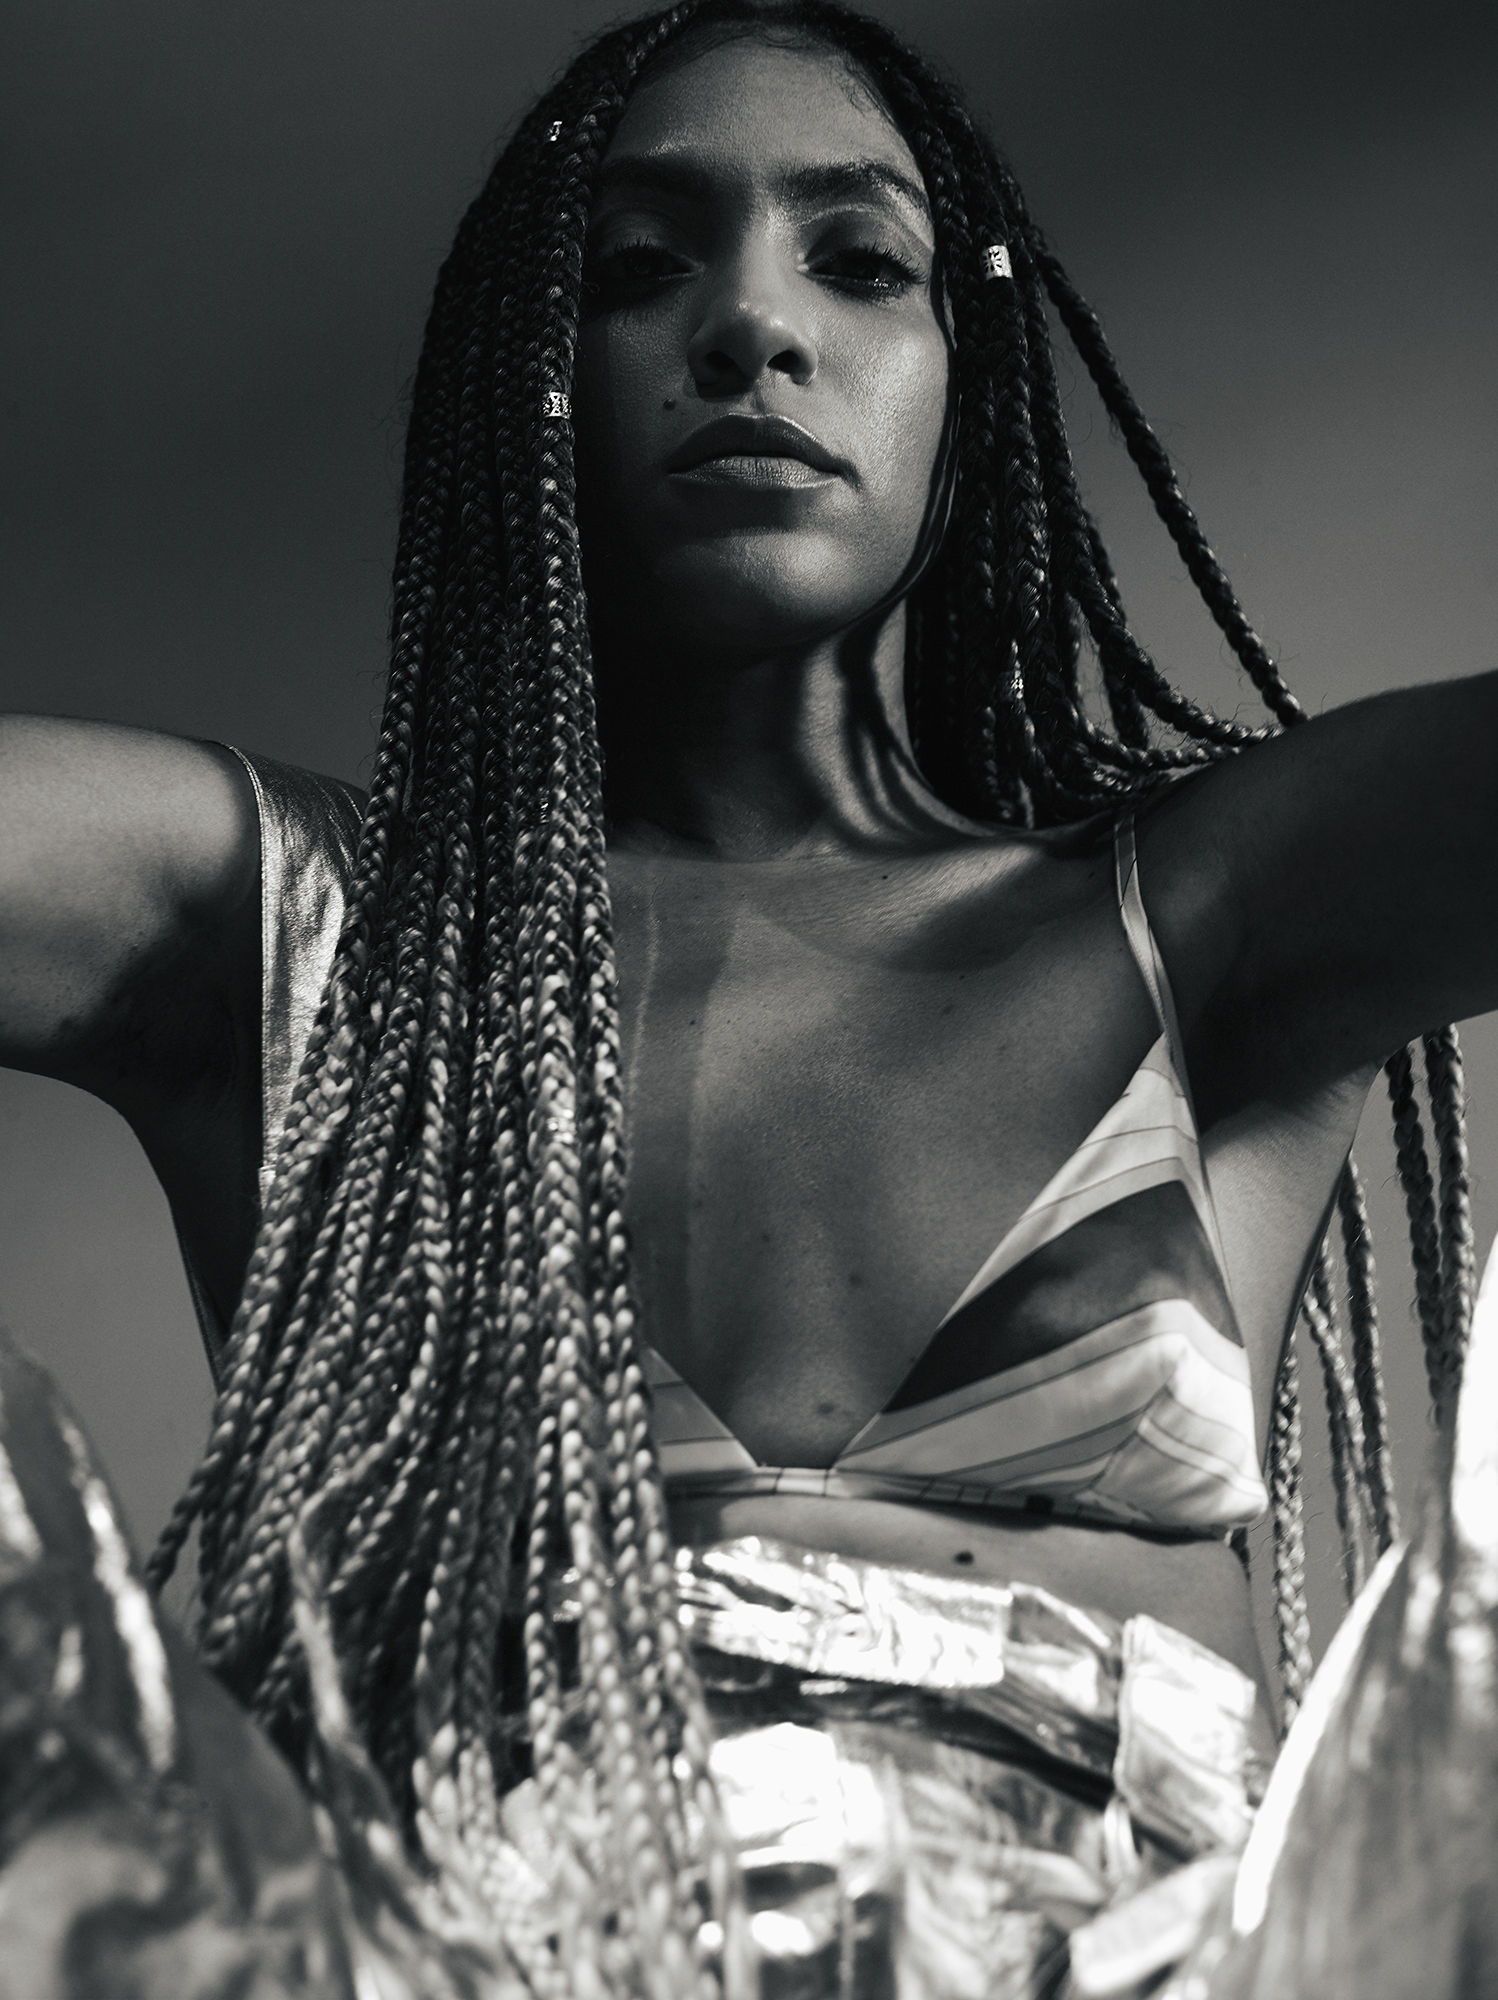  Naomi wears top <strong>Emilio Pucci</strong>, overalls <strong>Isabel Marant</strong>